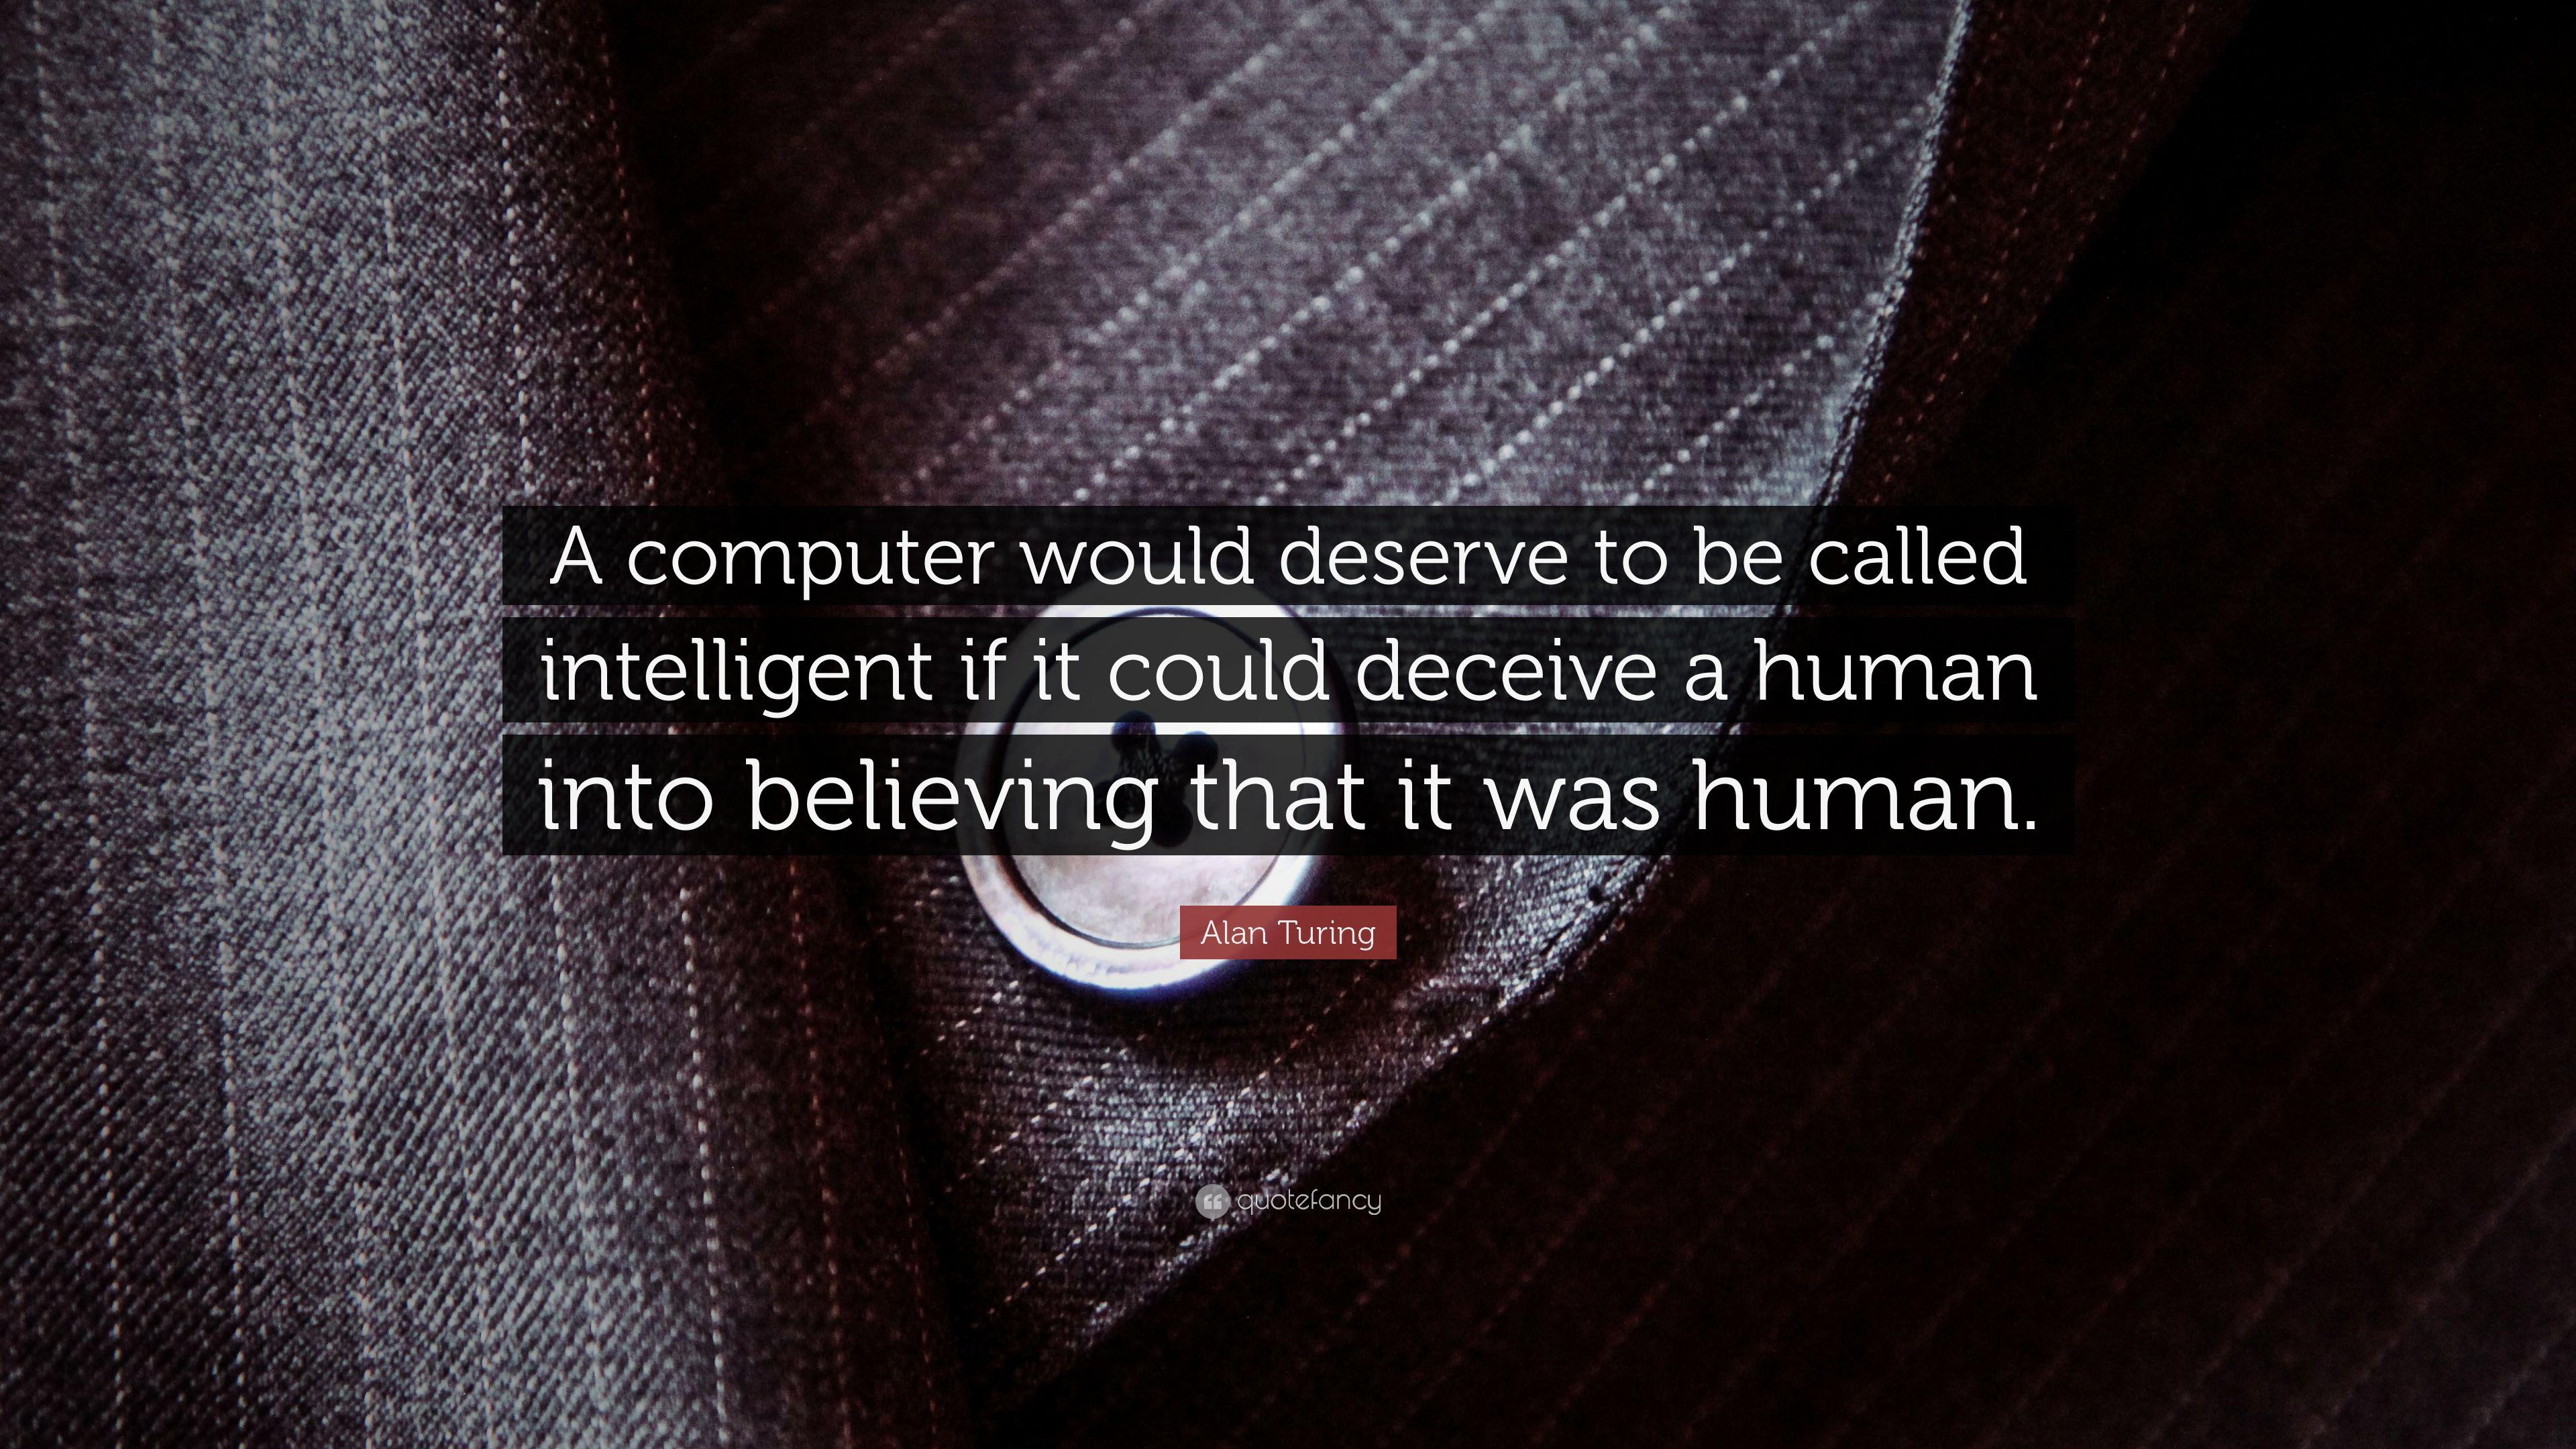 Alan Turing Quote: “A computer would deserve to be called